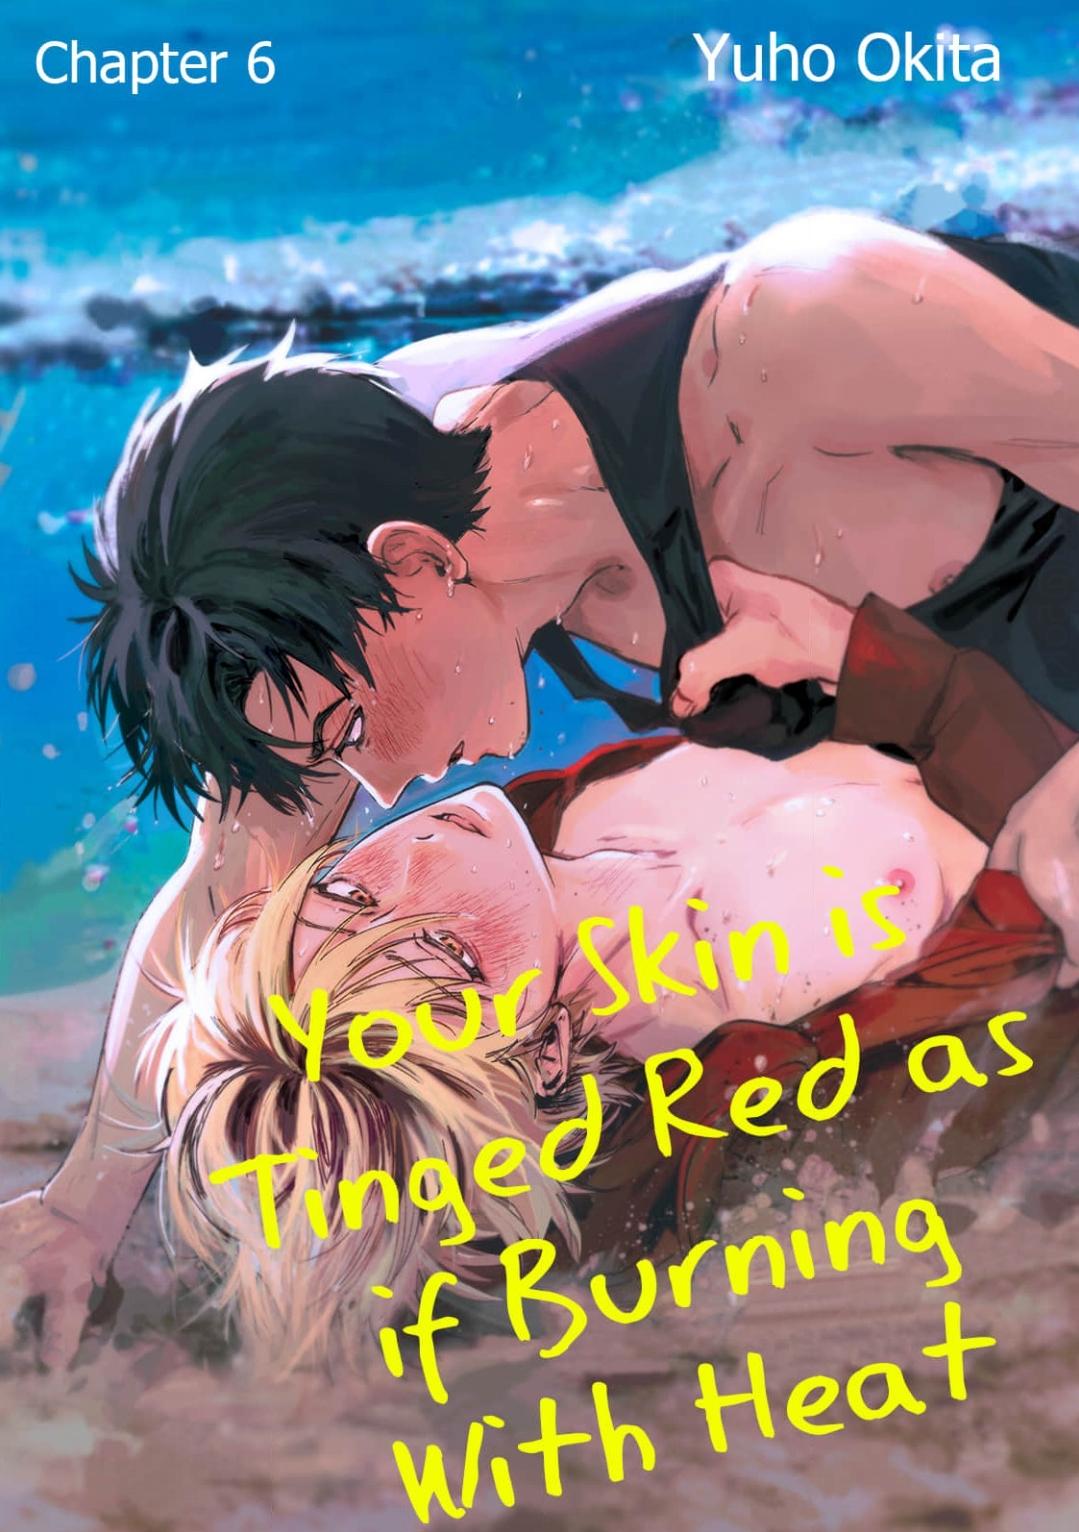 Your Skin Is Tinged Red As If Burning With Heat - Page 2